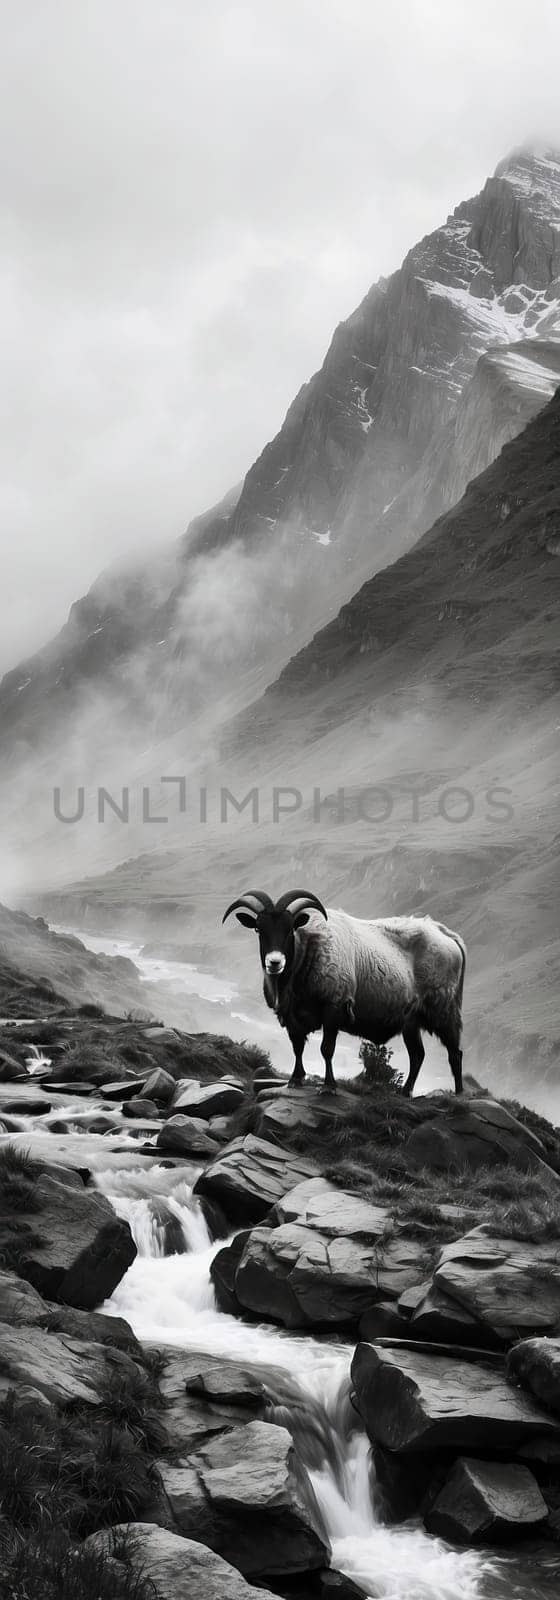 Mountain sheep black and white photo by applesstock